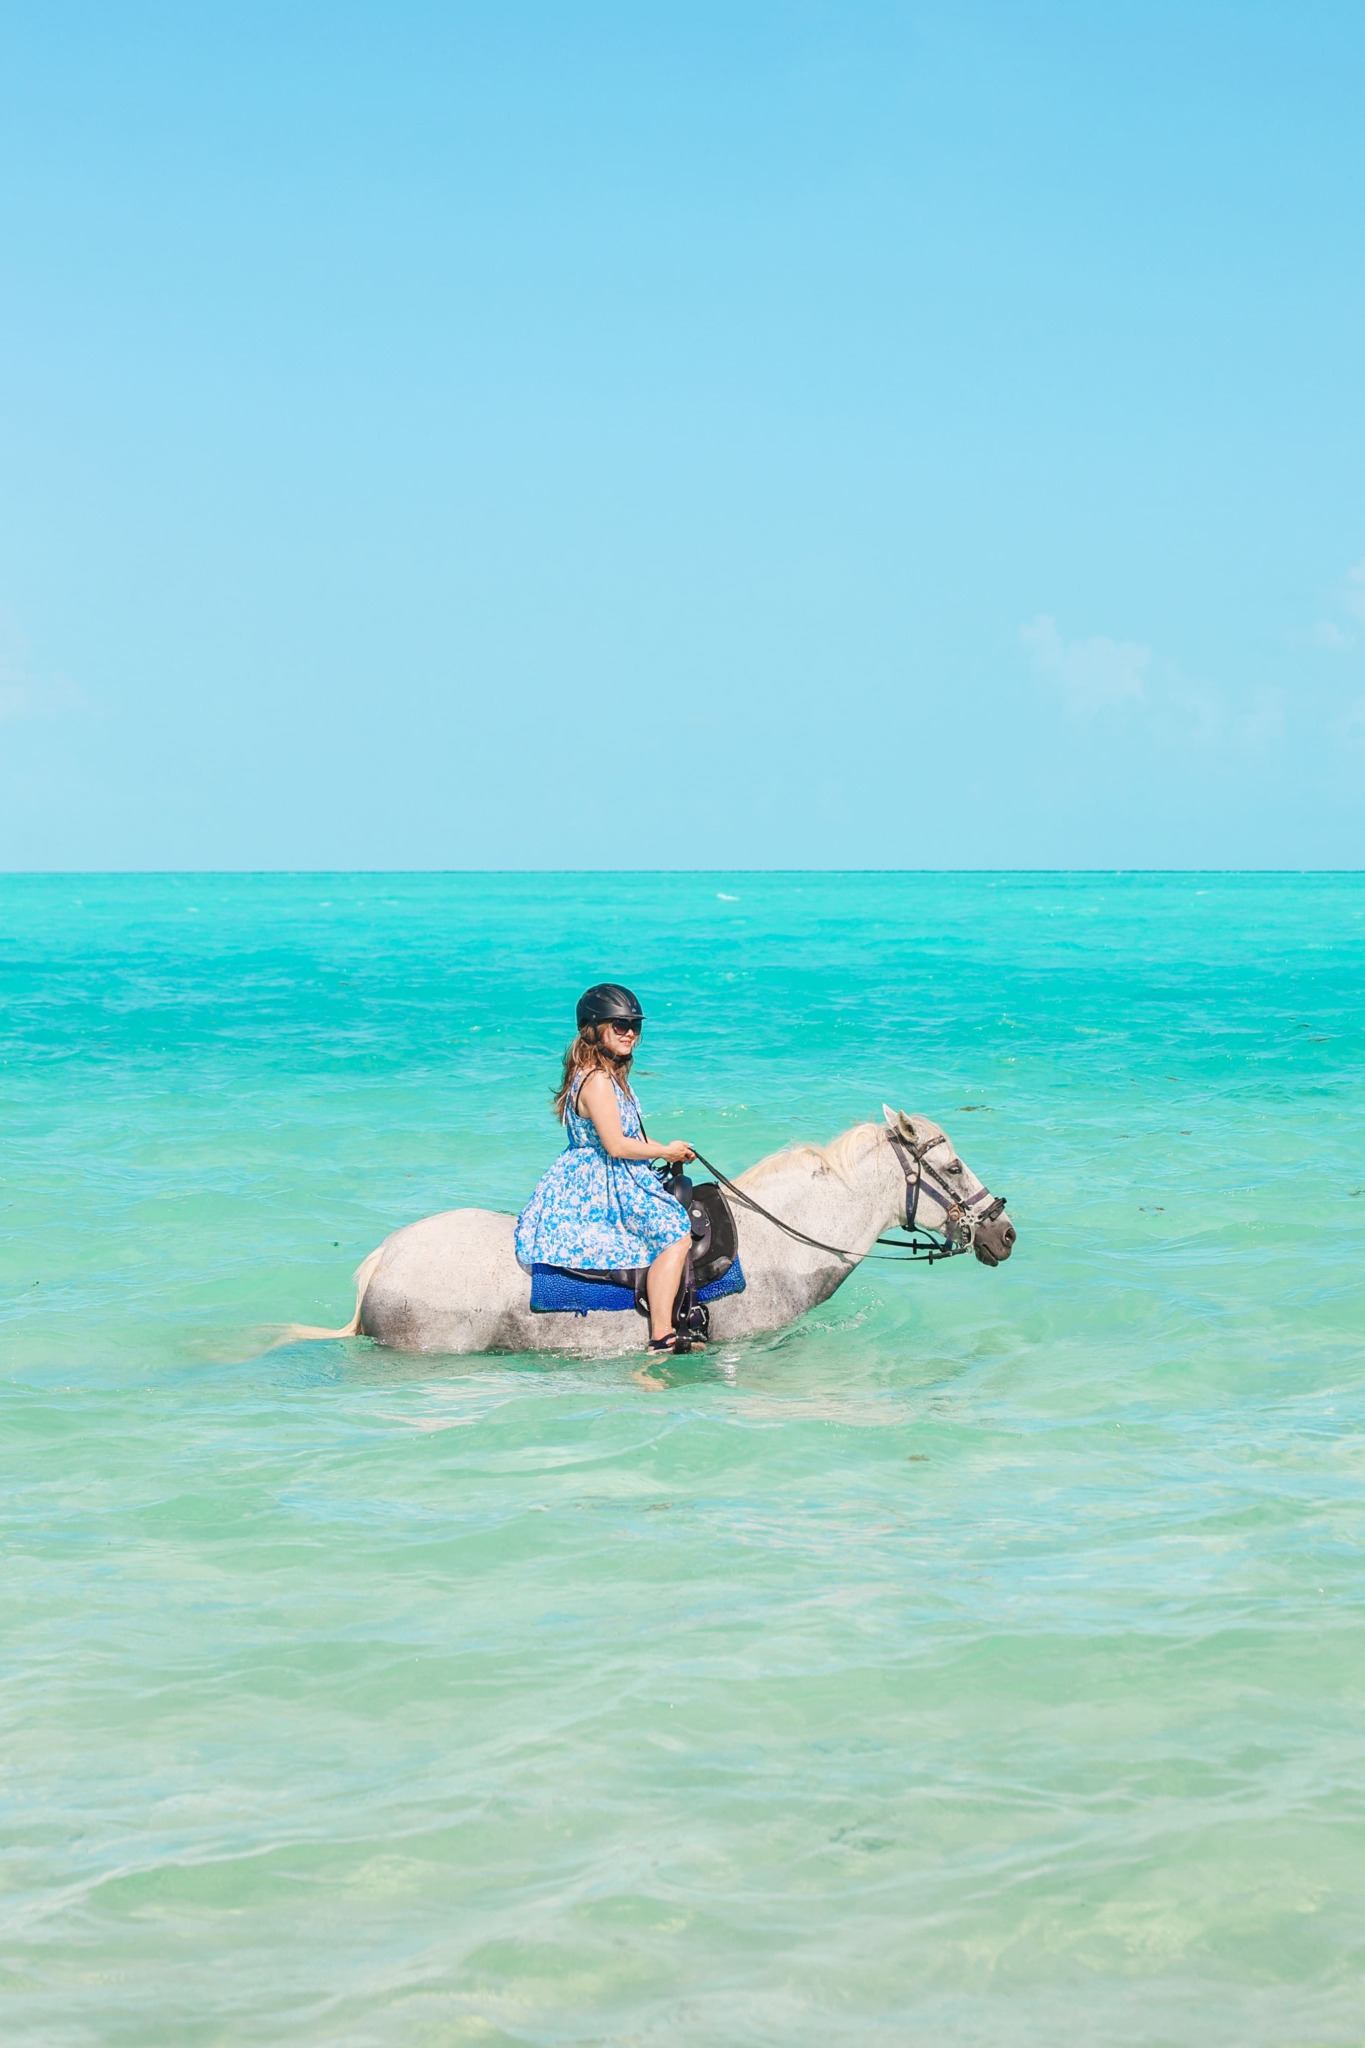 Provo Ponies horseback riding experience in Turks and Caicos. Photography by Jaz Wanderlust.